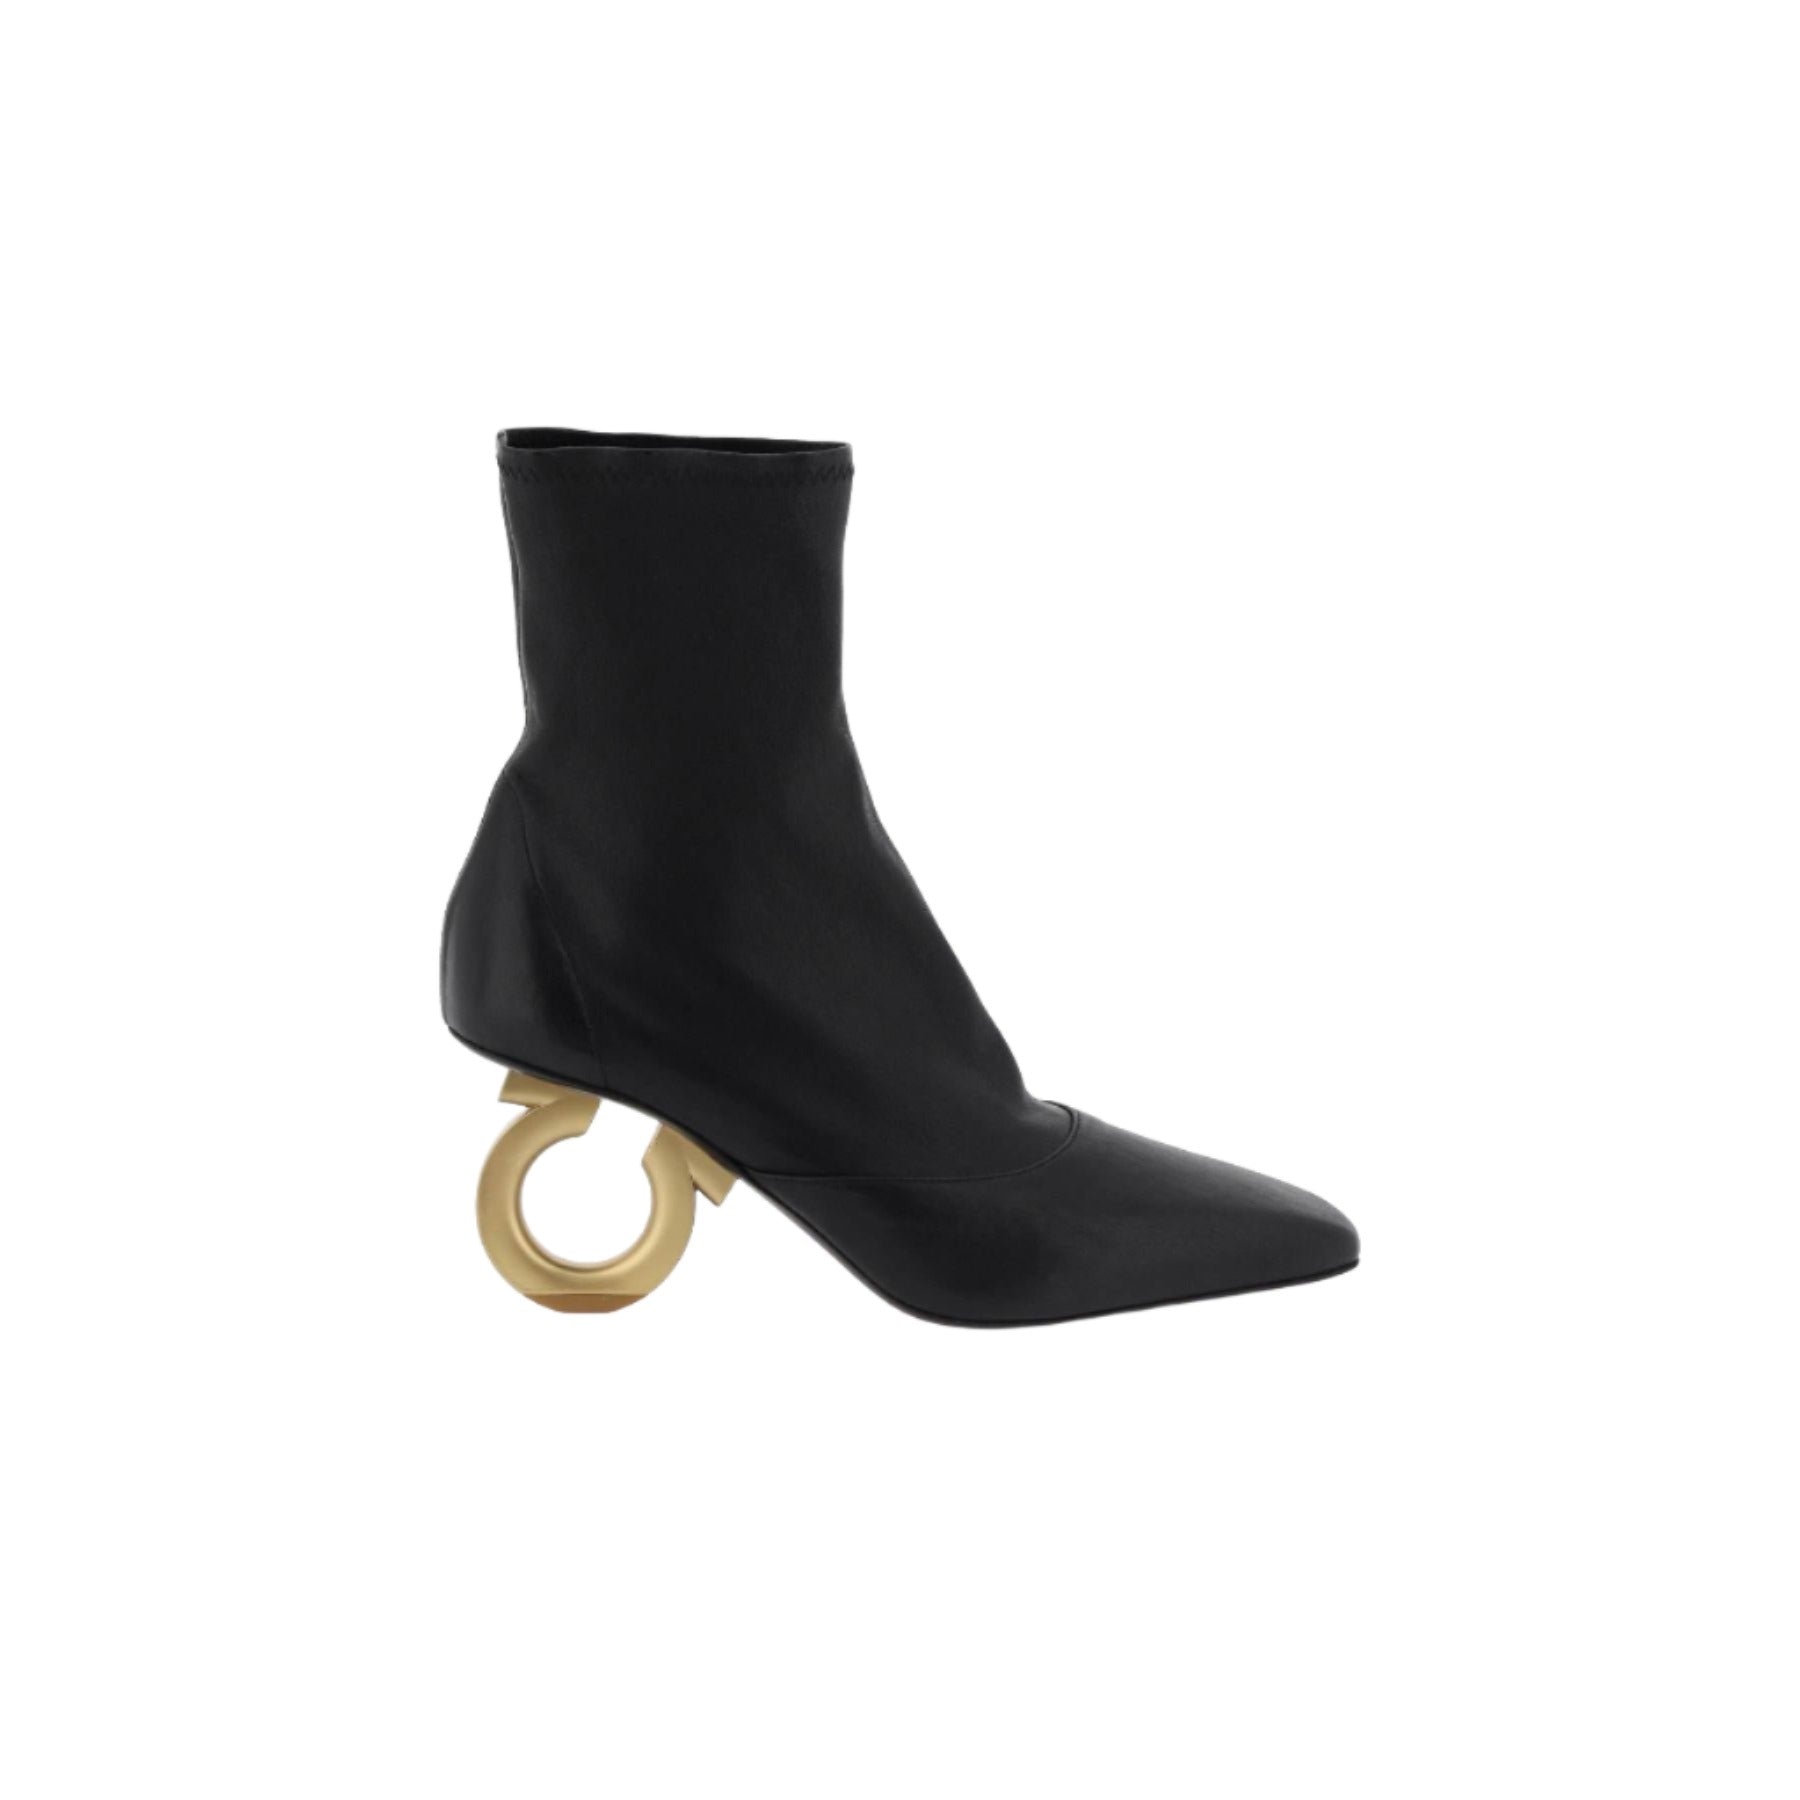 'Elina' Nappa Leather Ankle Boots